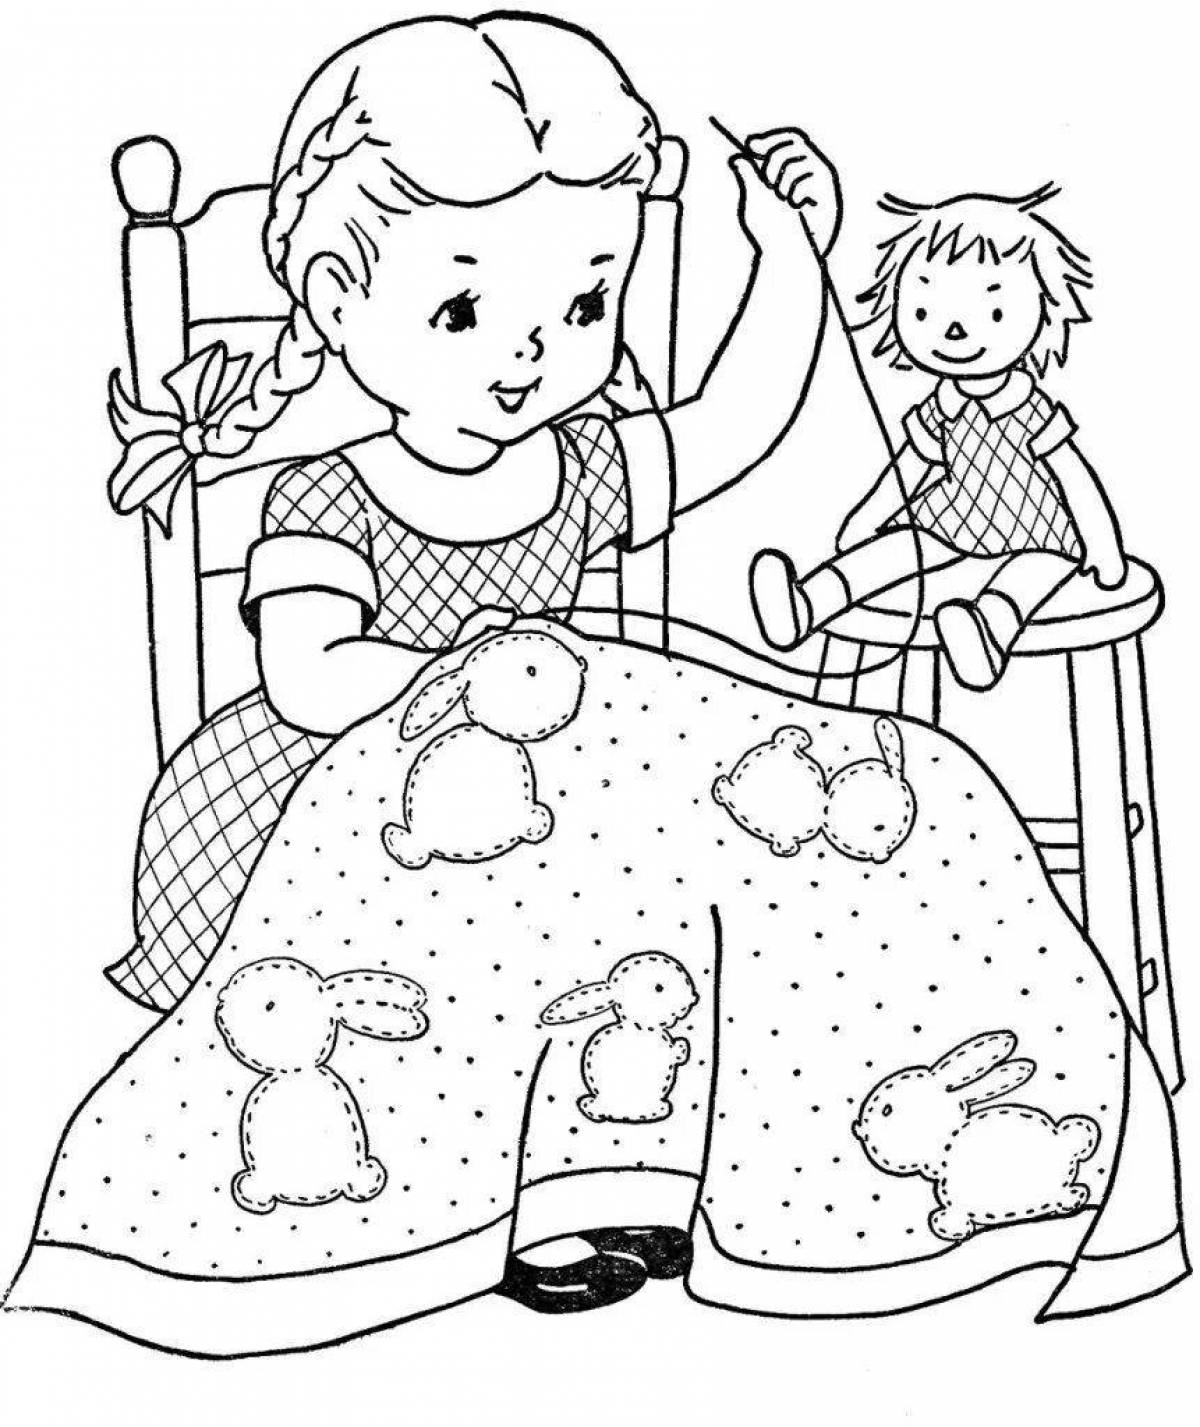 A funny seamstress coloring for kids